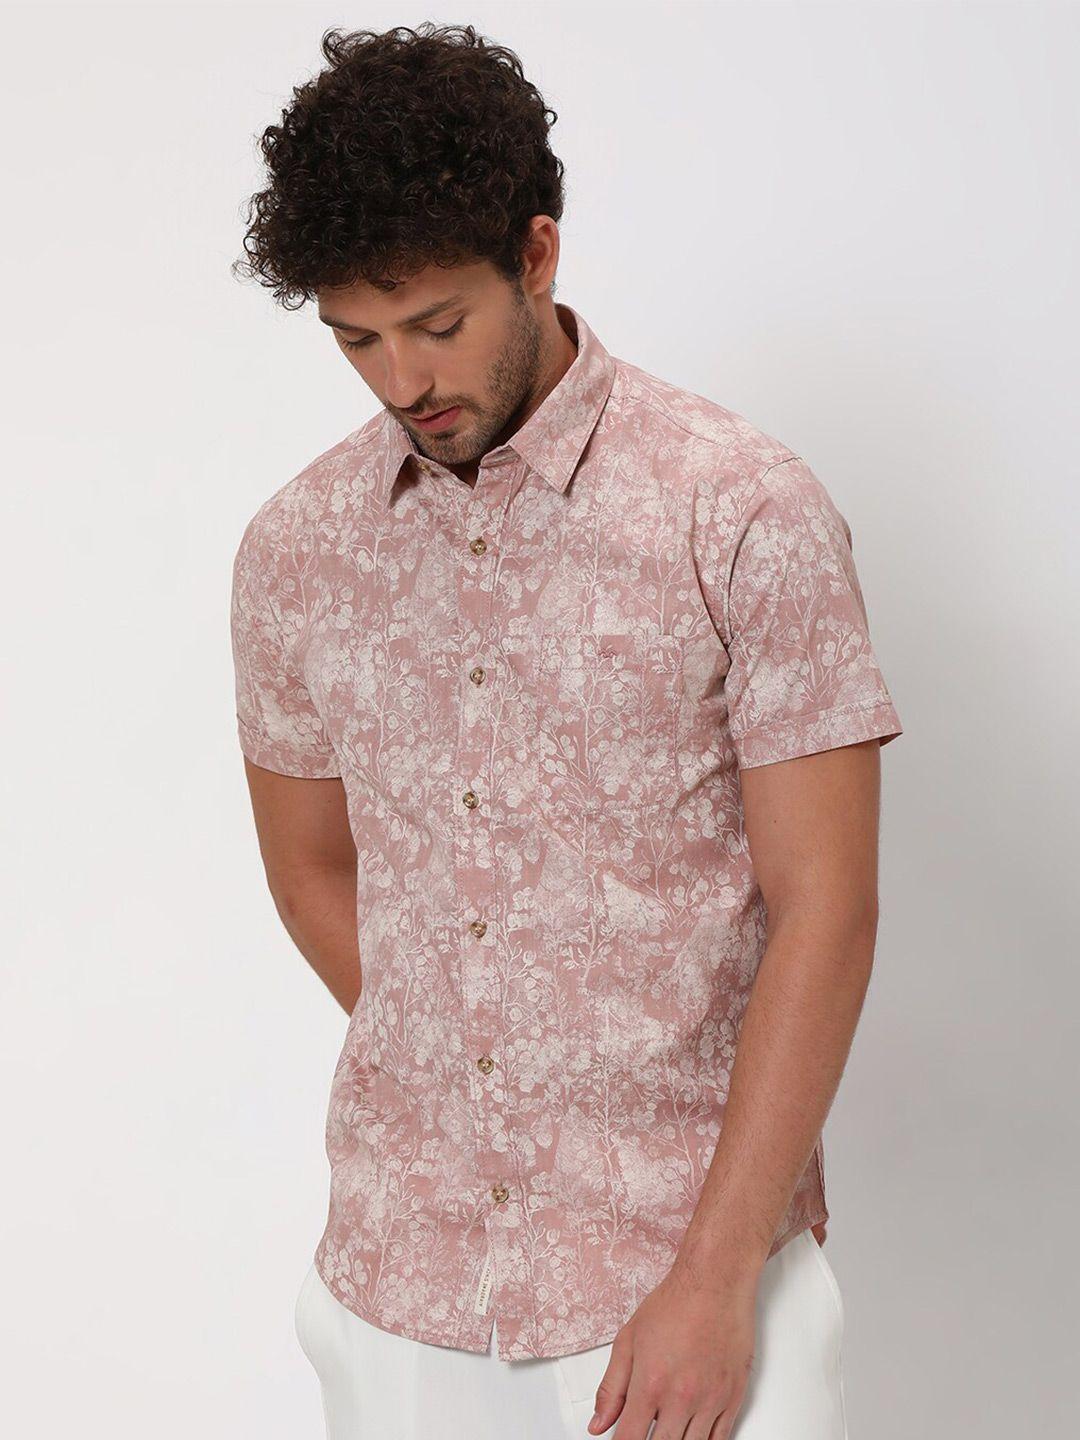 mufti-slim-fit-floral-printed-opaque-pure-cotton-casual-shirt